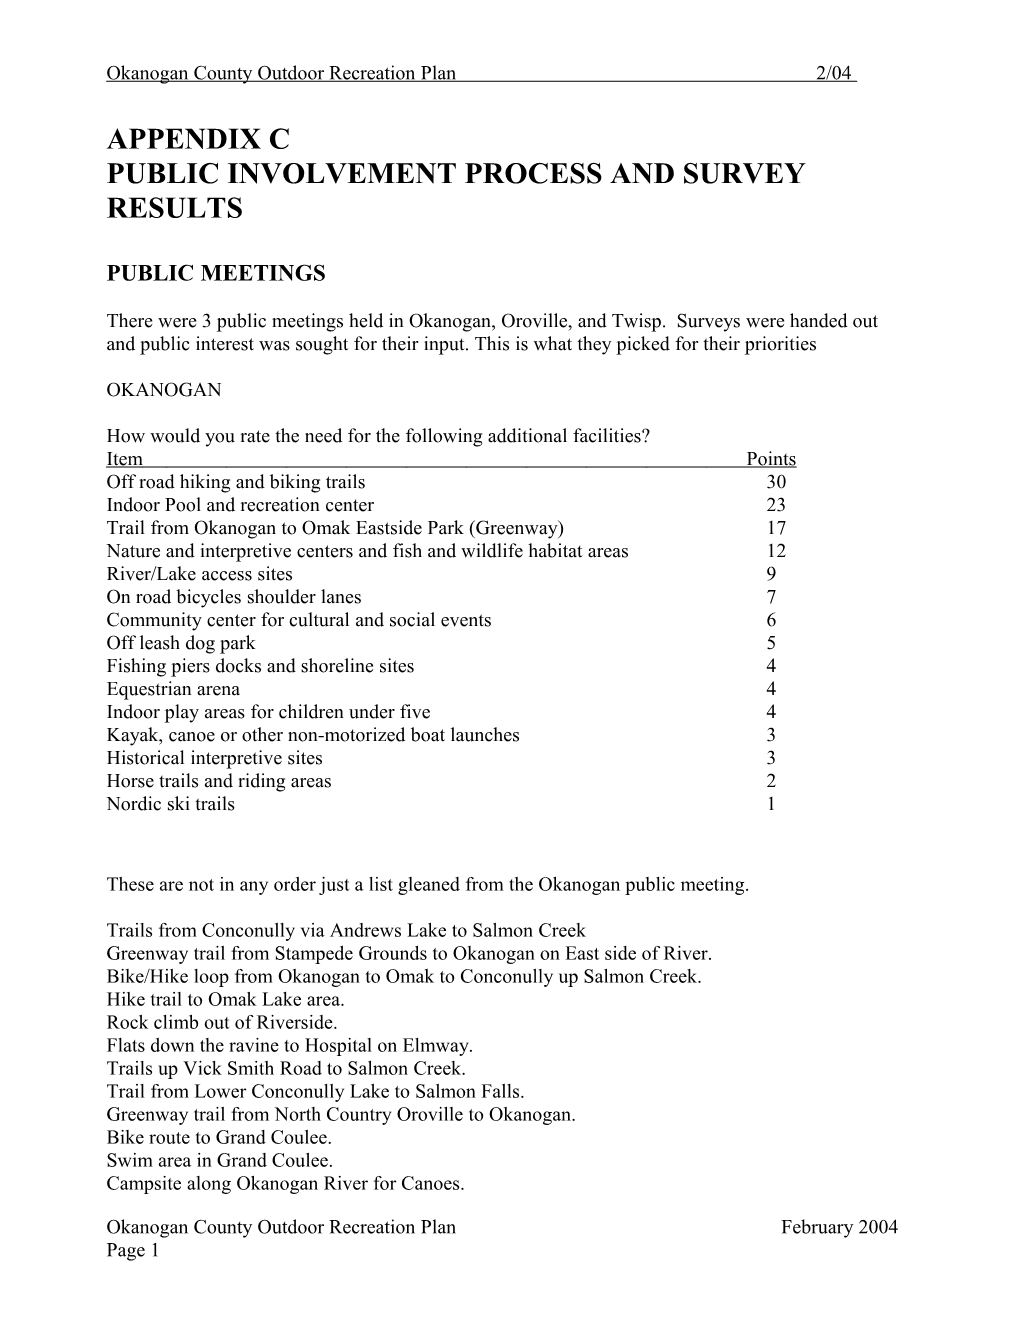 Public Involvement Process and Survey Results